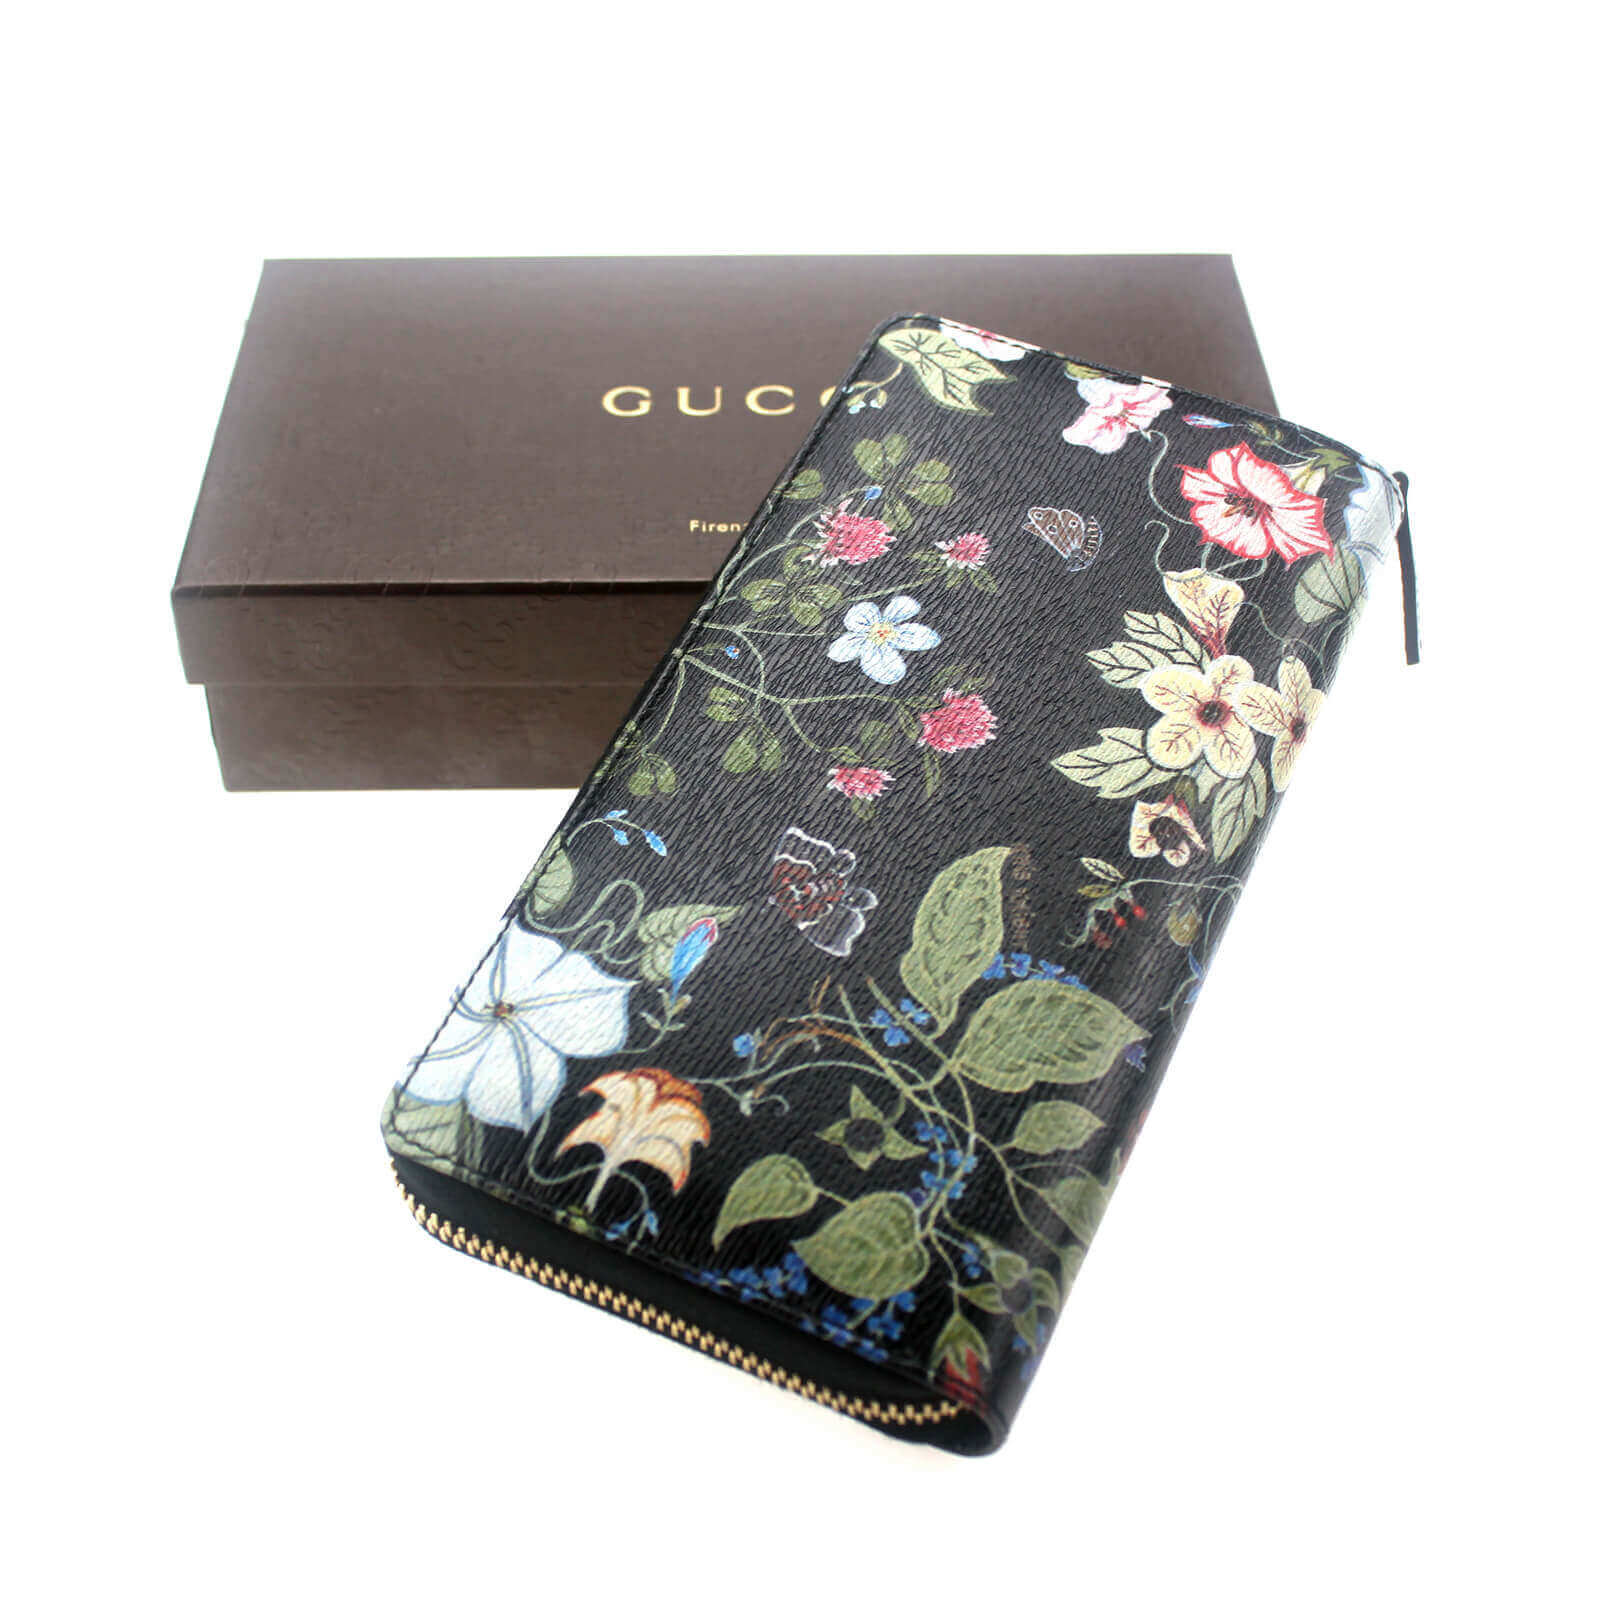 Gucci Wallet | Flora Knight Leather Multicolor | BagBuyBuy